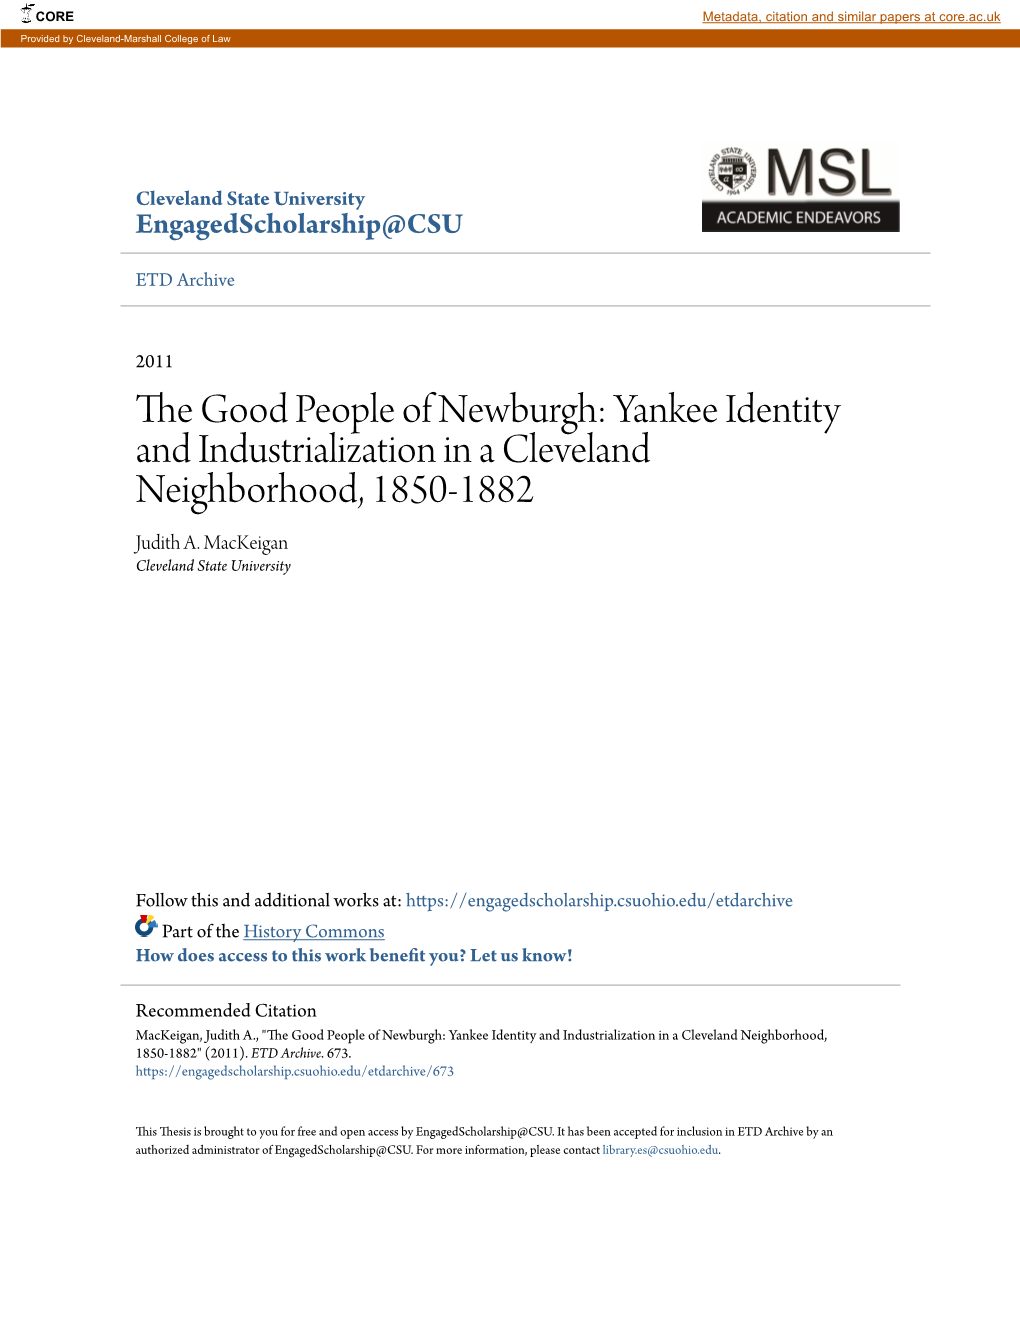 The Good People of Newburgh: Yankee Identity and Industrialization in a Cleveland Neighborhood, 1850-1882 Judith A